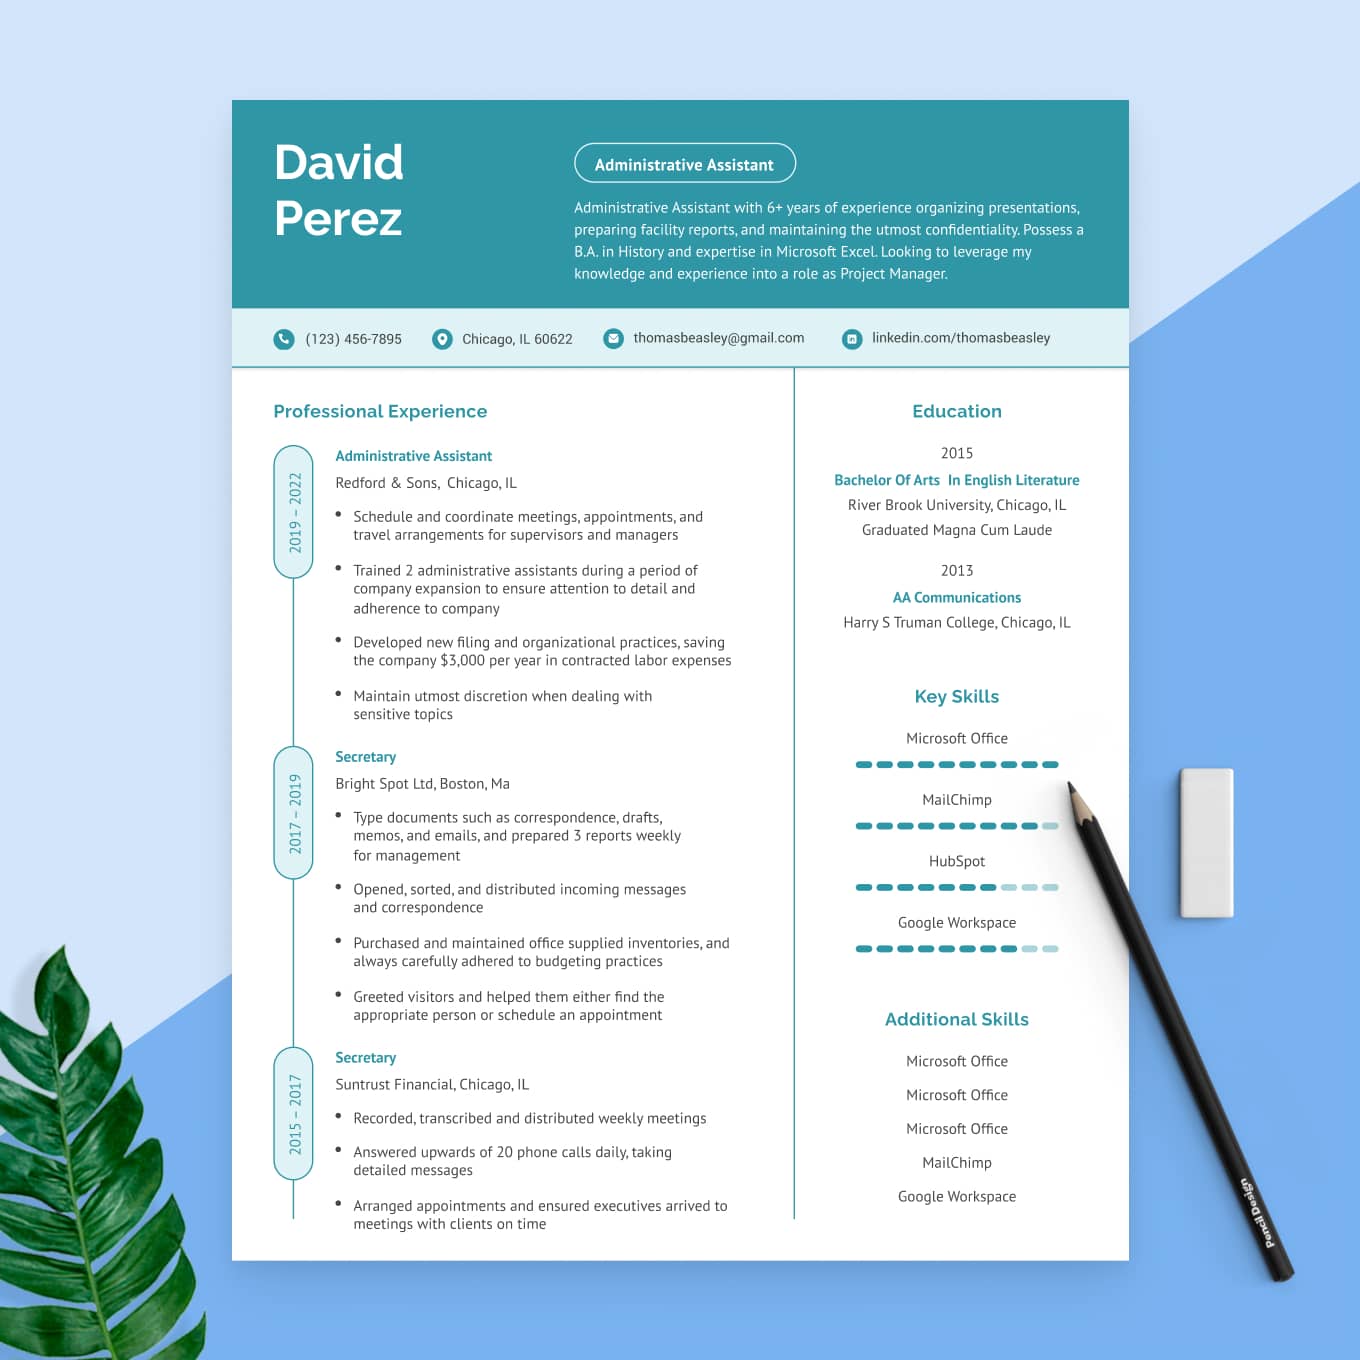 Our Standard resume template atop a wooden table with a succulent beside it.